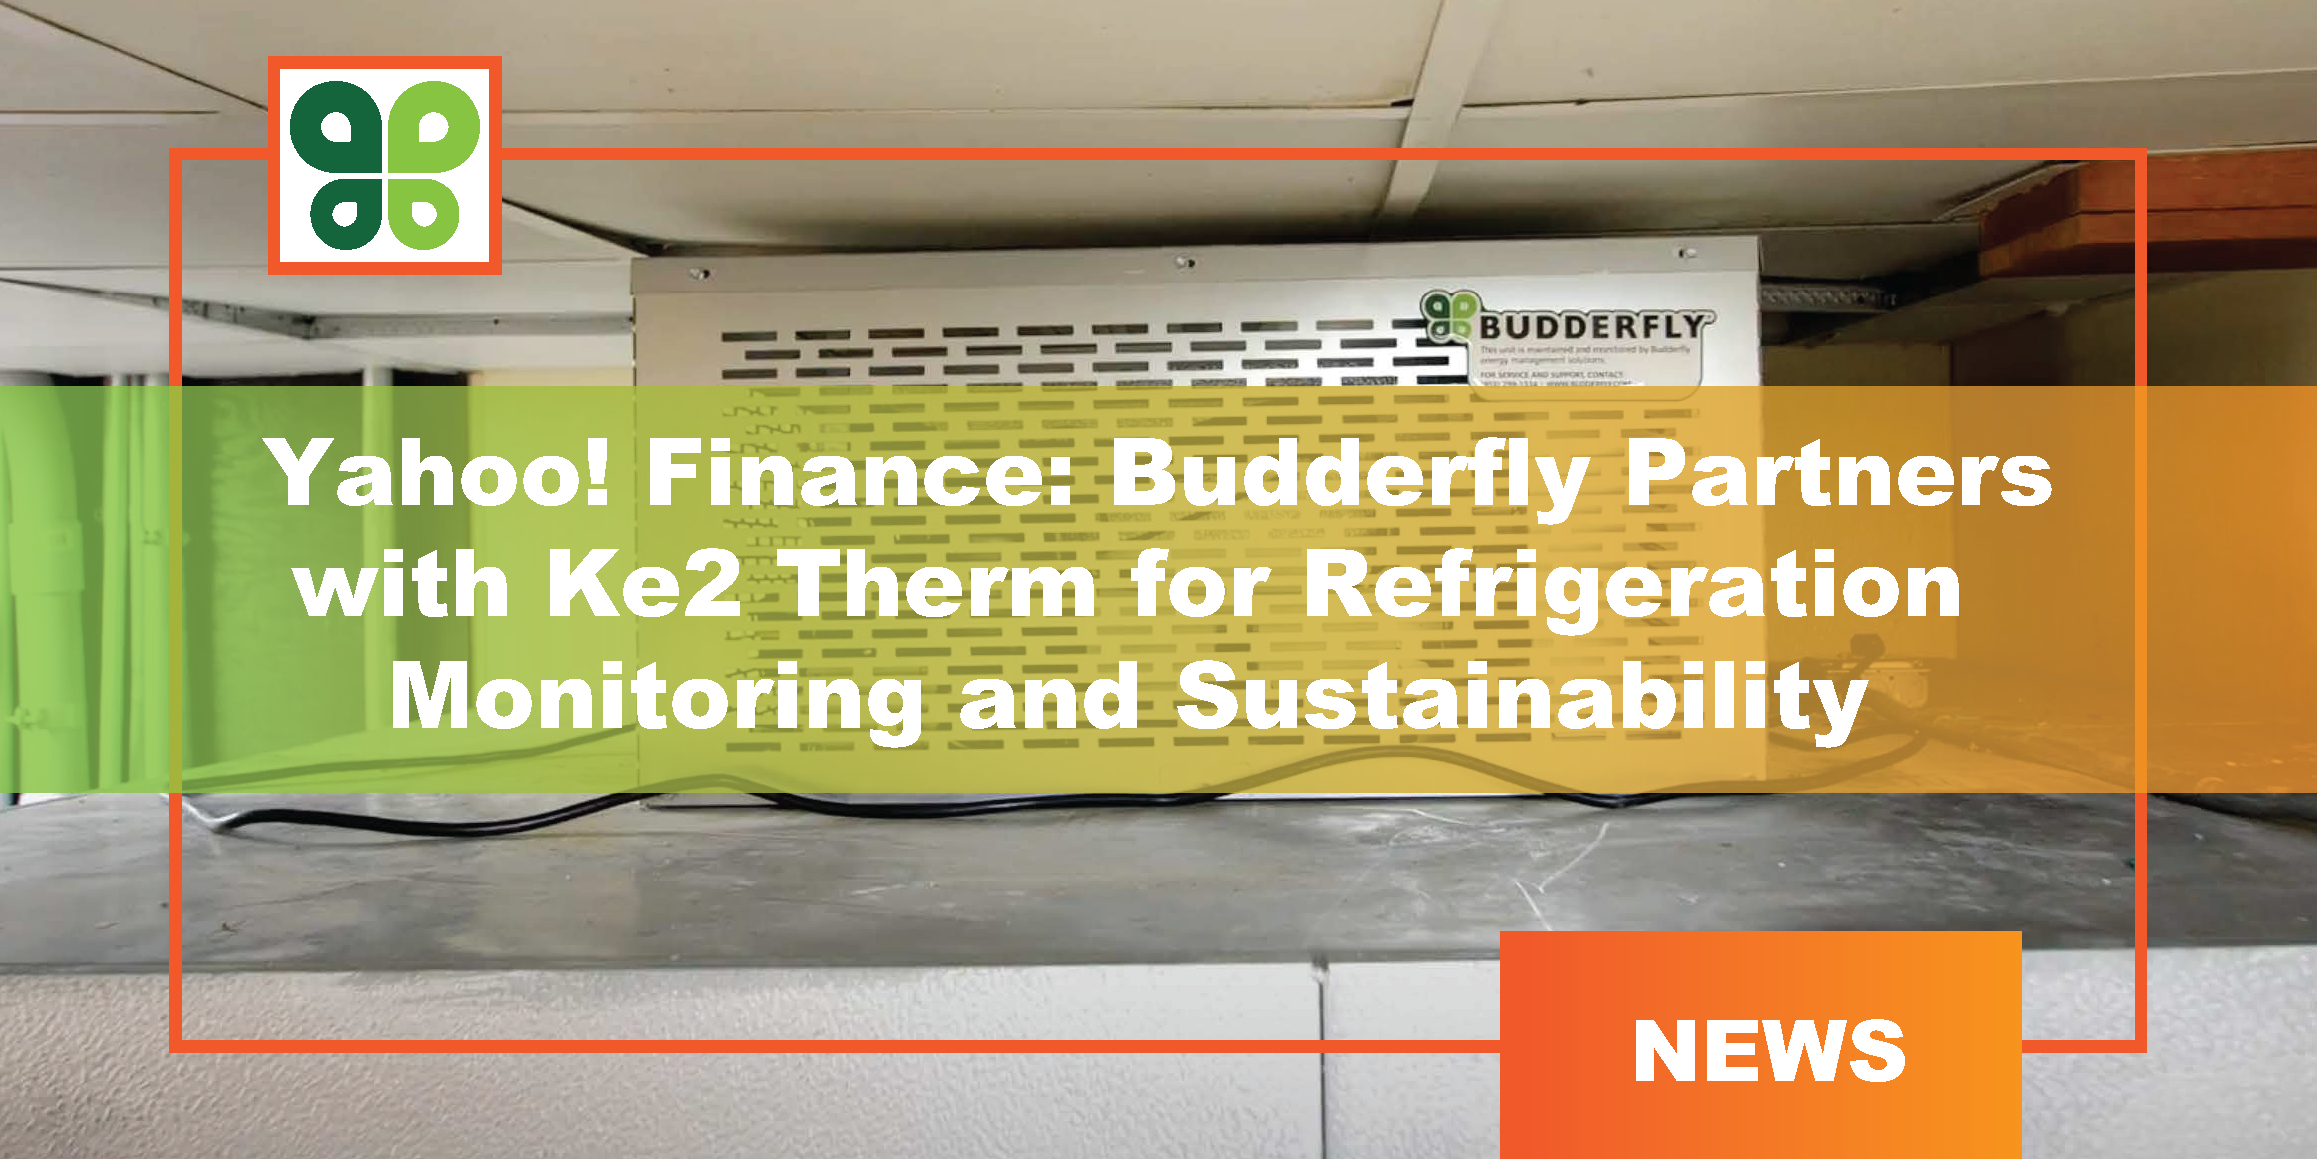 Budderfly Partners with KE2 Therm For Refrigeration Monitoring And Sustainability